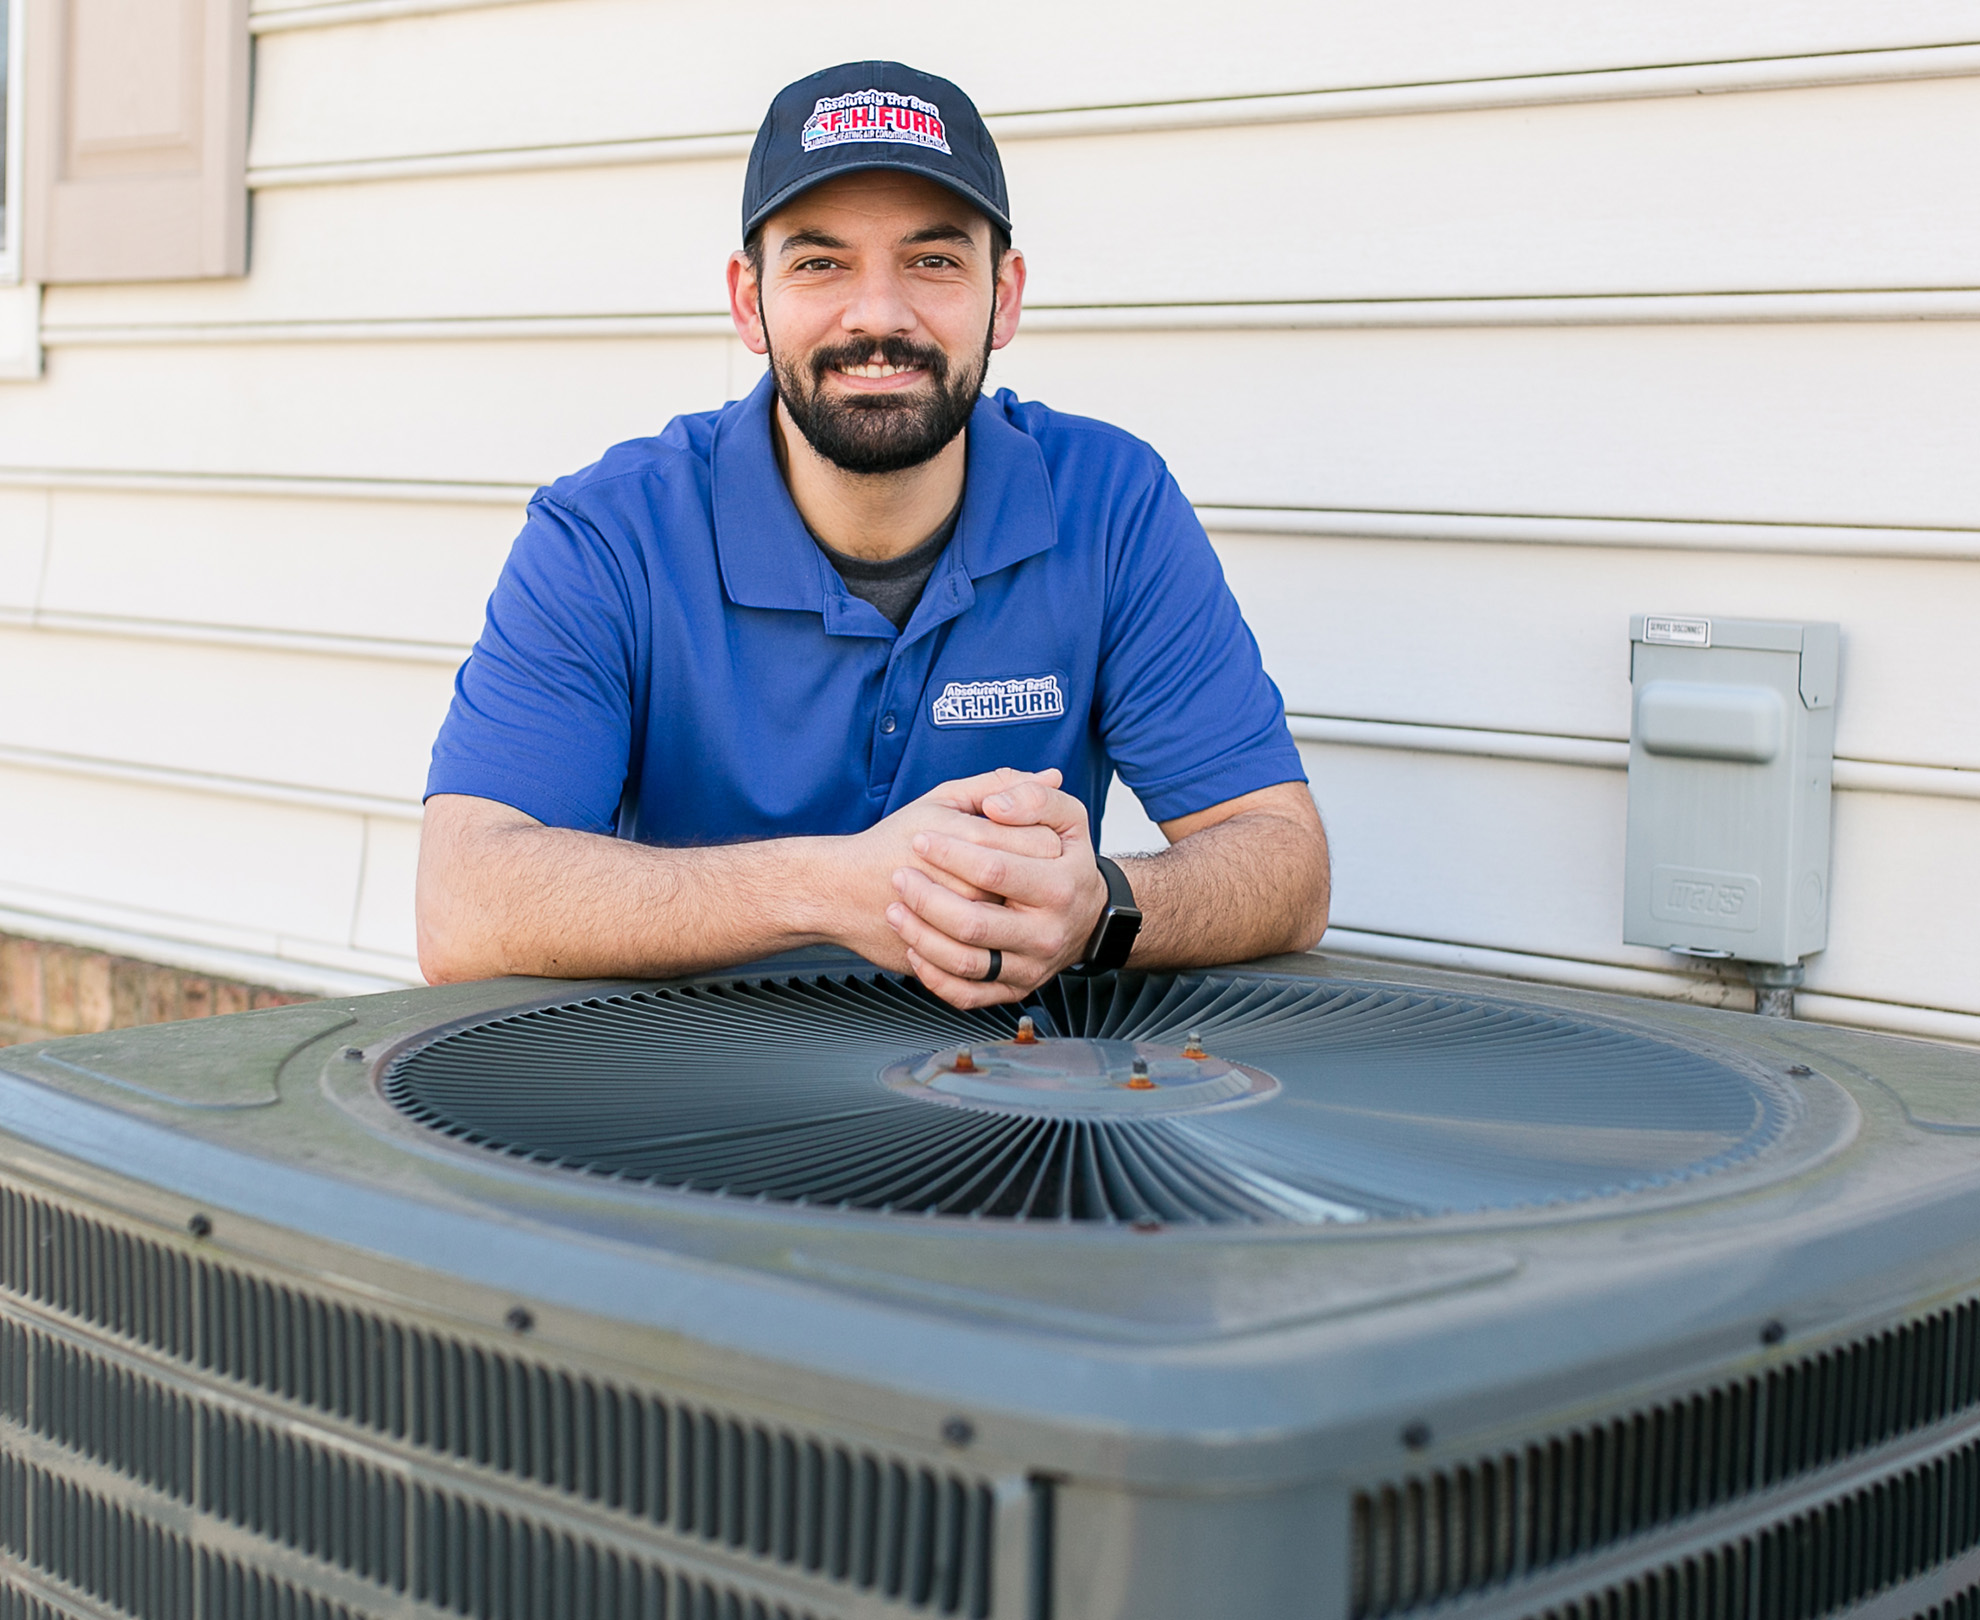 F.H. Furr Plumbing, Heating, Air Conditioning & Electrical